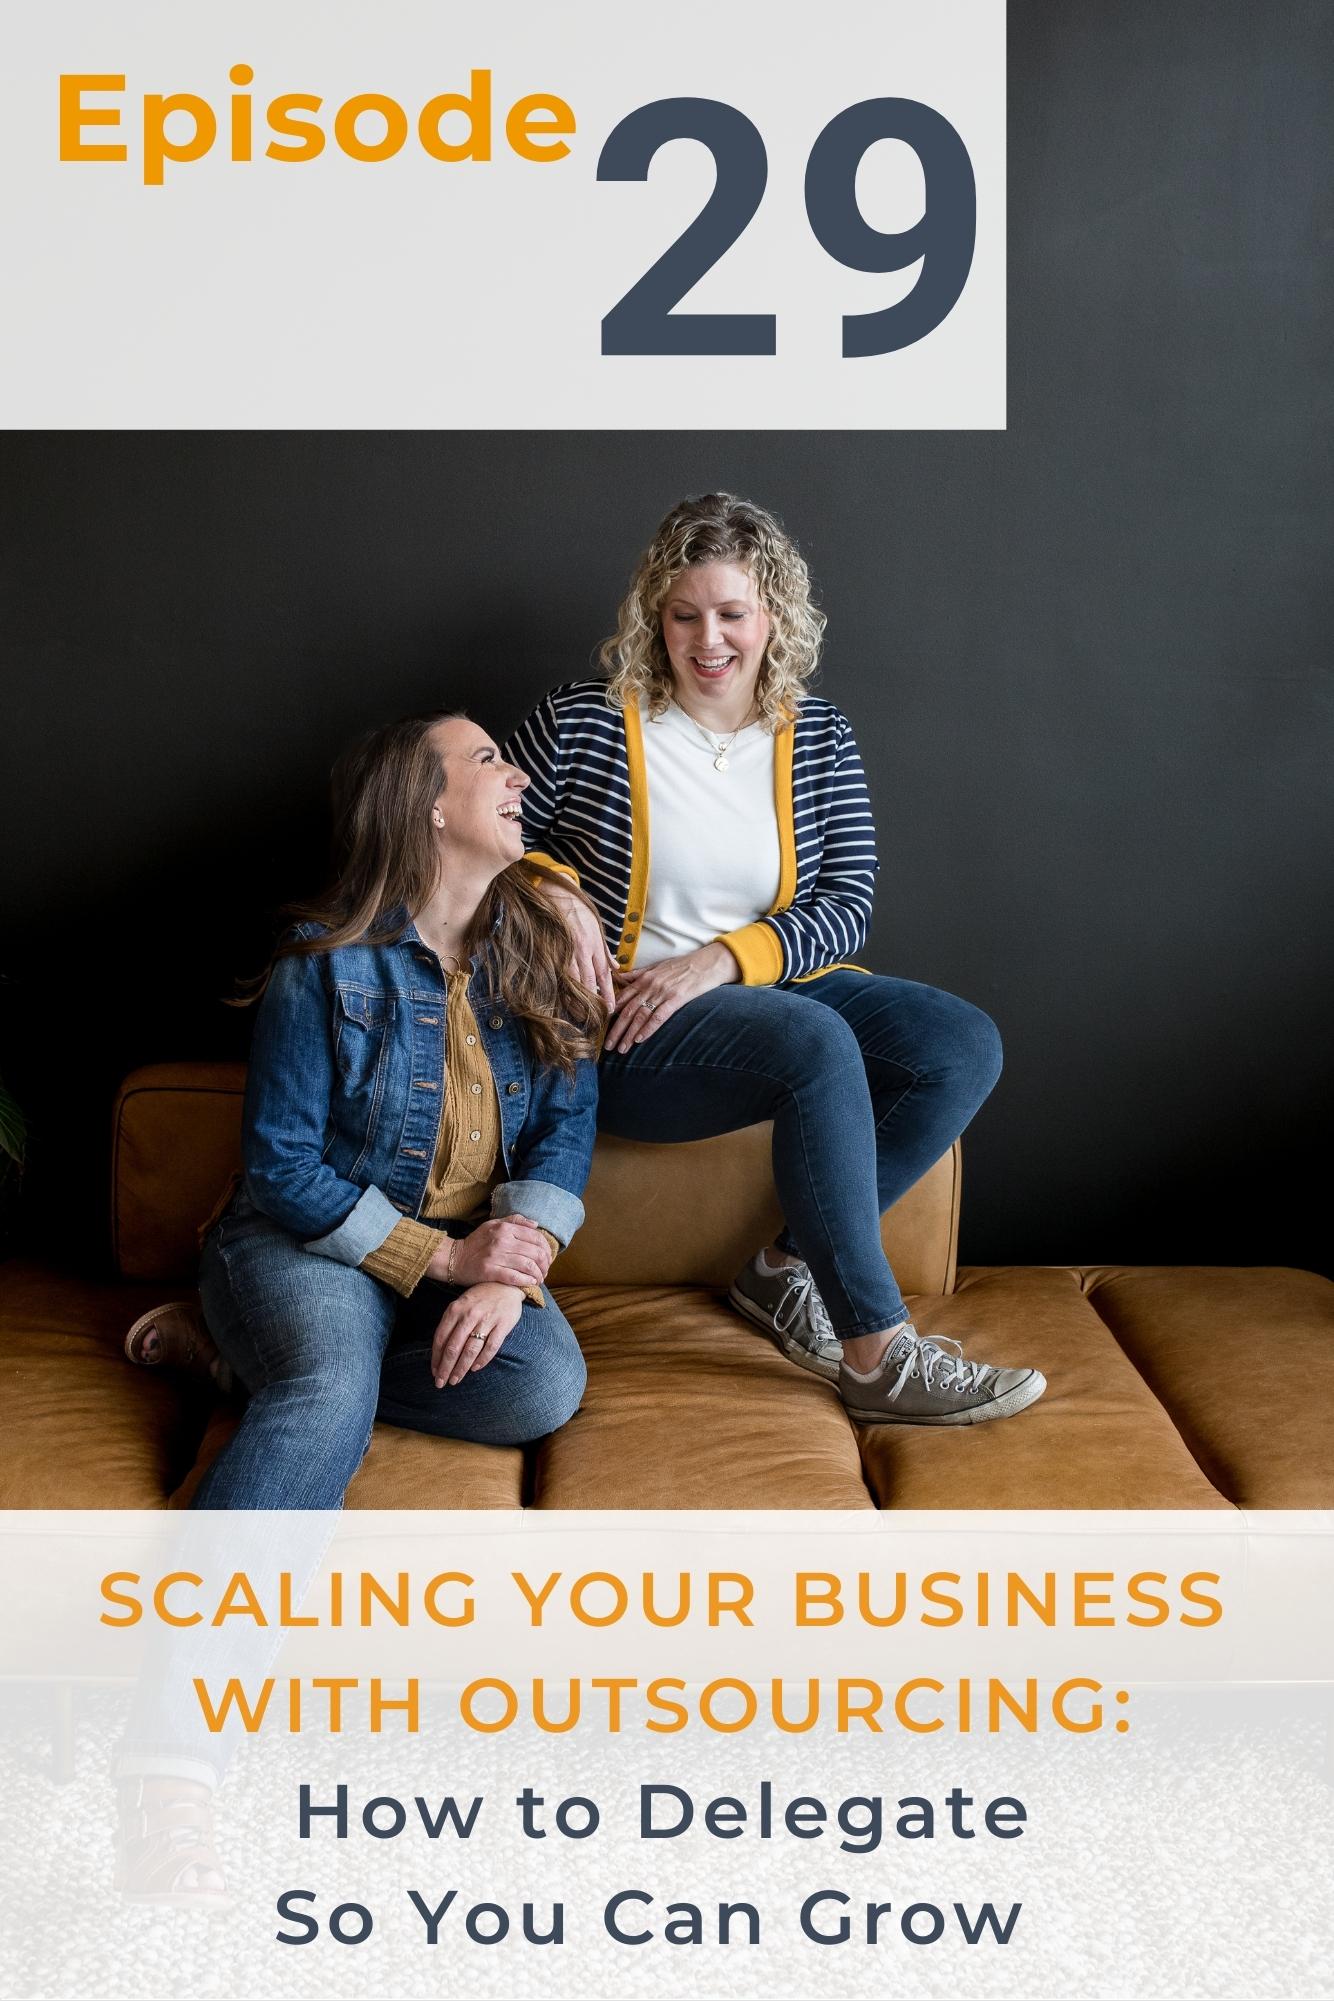 Two Christian business women and podcast hosts sitting on a couch looking at each other with a graphic that talks about scaling your business through outsourcing.